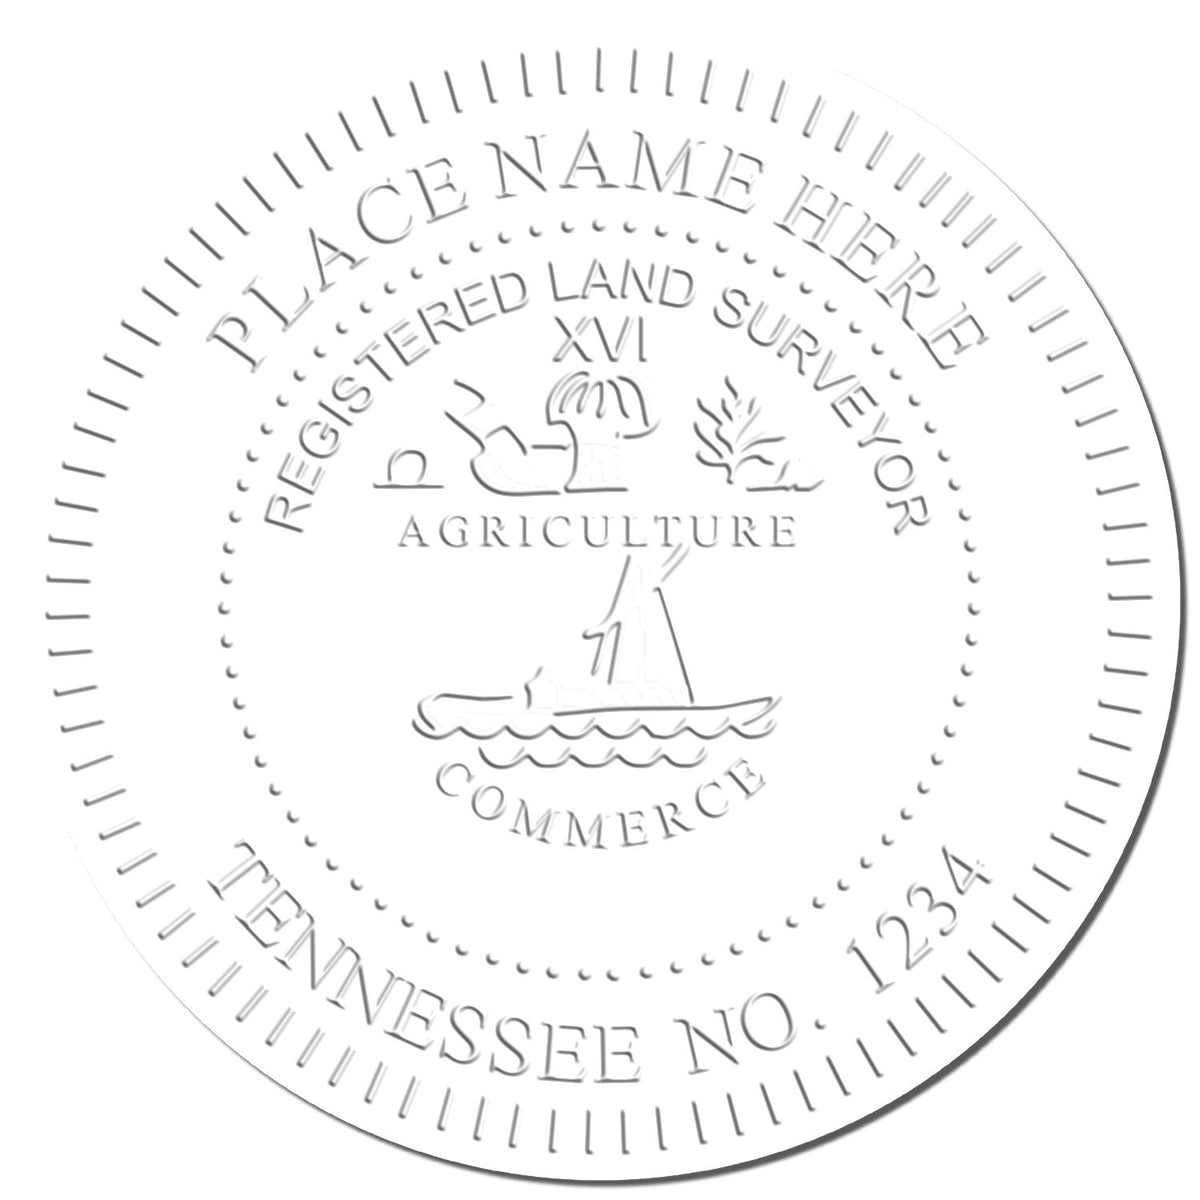 This paper is stamped with a sample imprint of the State of Tennessee Soft Land Surveyor Embossing Seal, signifying its quality and reliability.